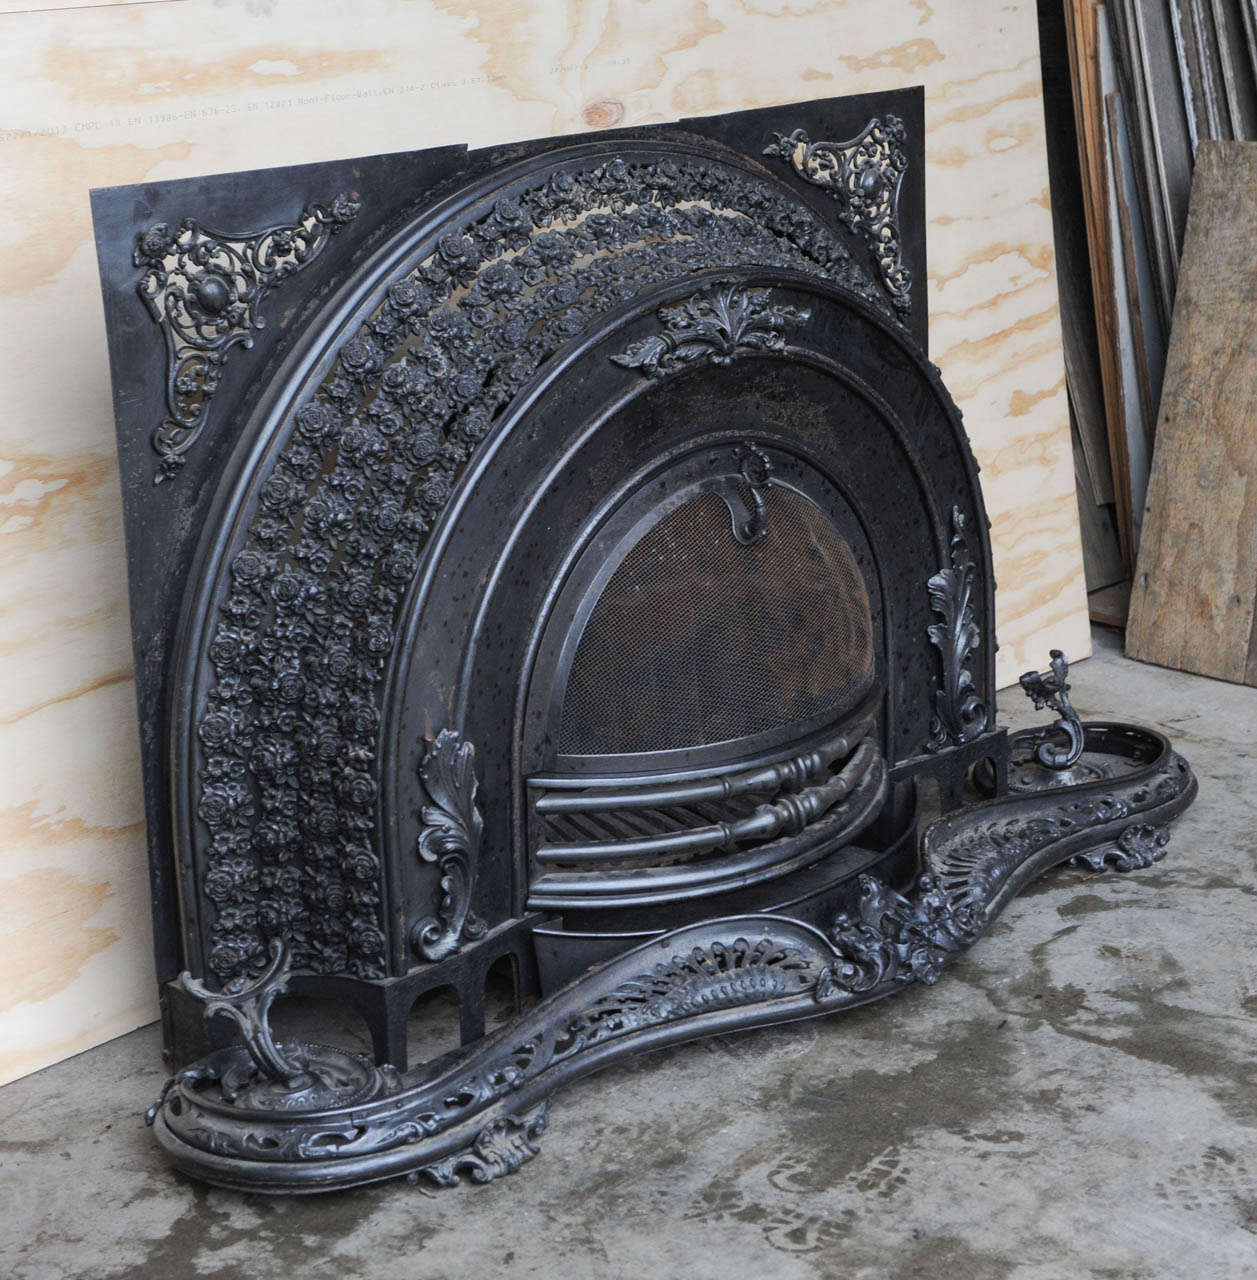 Arched shape, complete with it's original scrolled fender and crate insert. The wrought iron base with scrolled feet. Great Steampunk look.
We bought it form a Amsterdam canalhouse, it could also work well in a modern environment.